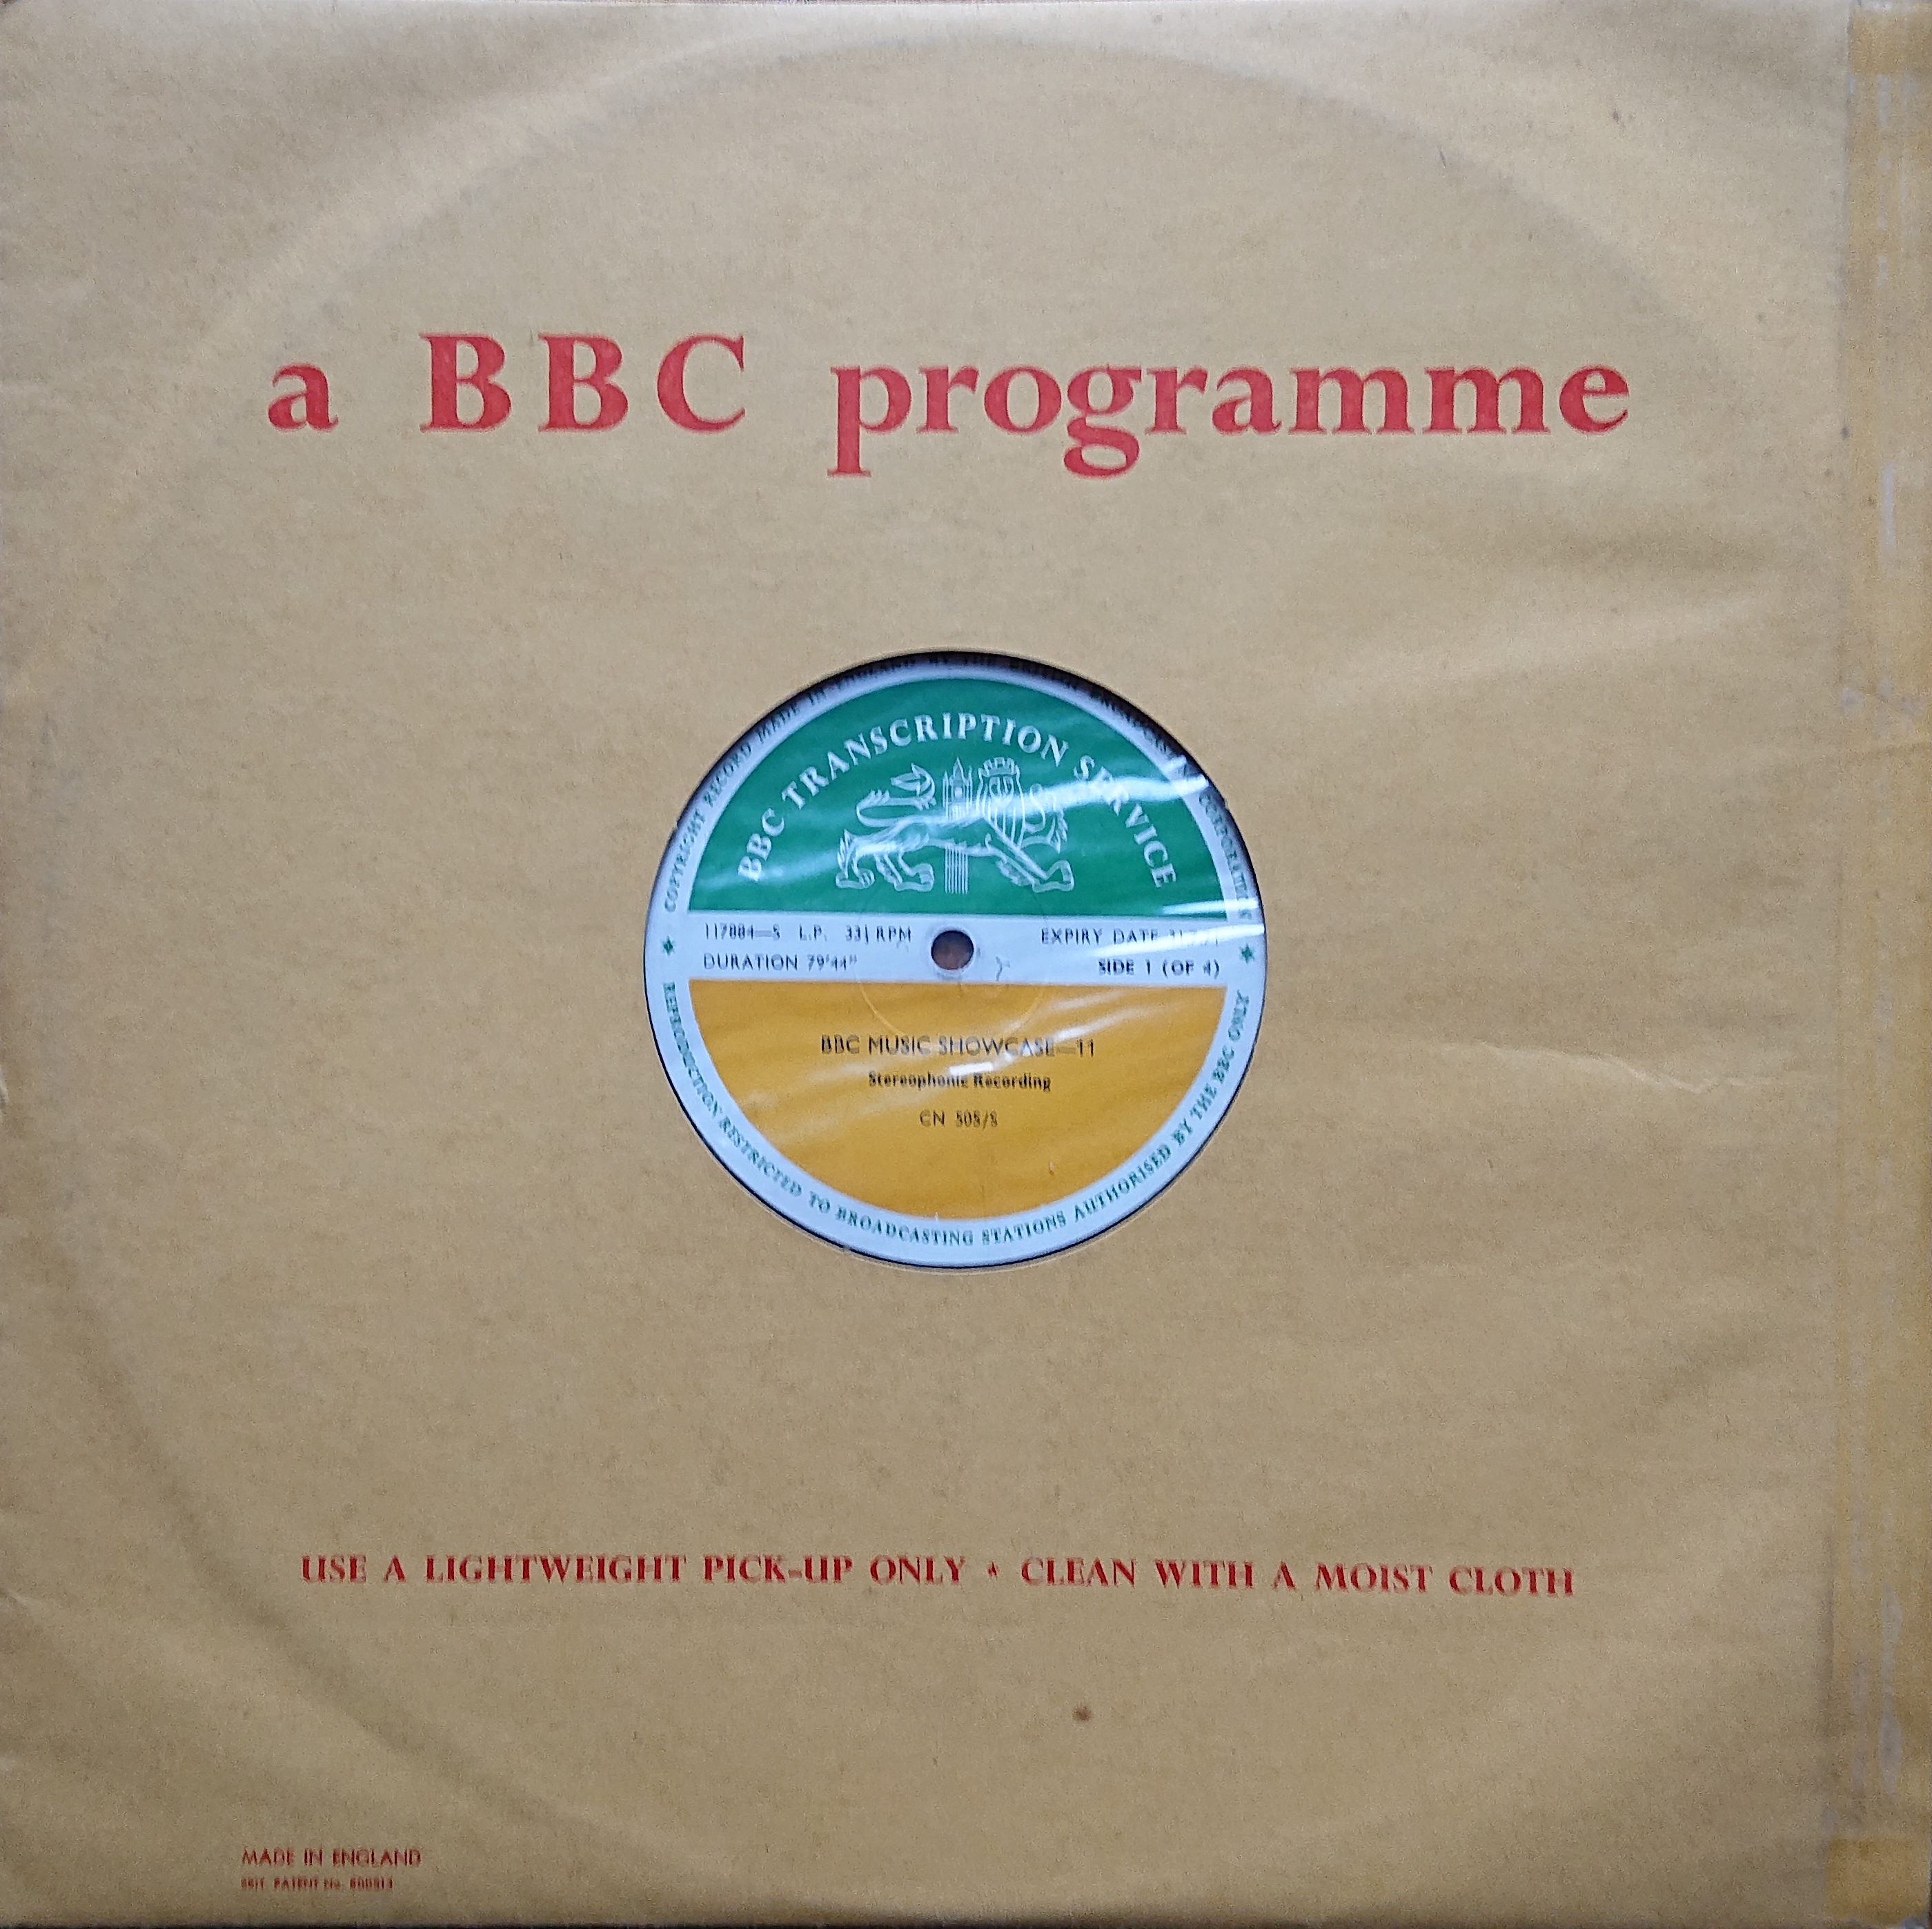 Picture of CN 505 S 21 BBC music showcase - 11 (Sides 1 & 3) by artist Various from the BBC records and Tapes library